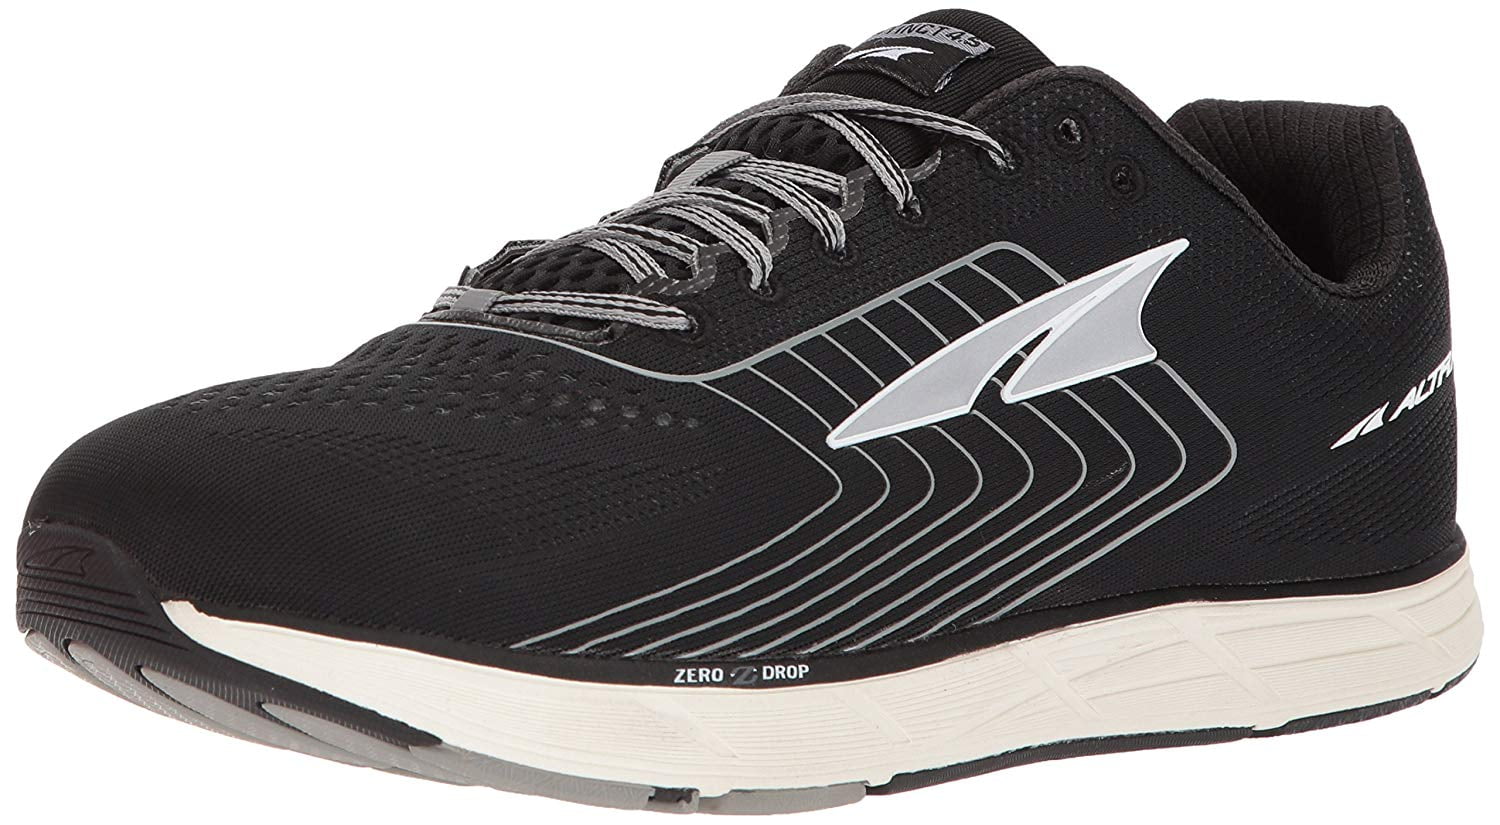 Altra - Altra Men's Instinct 4.5 Lace-Up Athletic Running Shoes Black ...